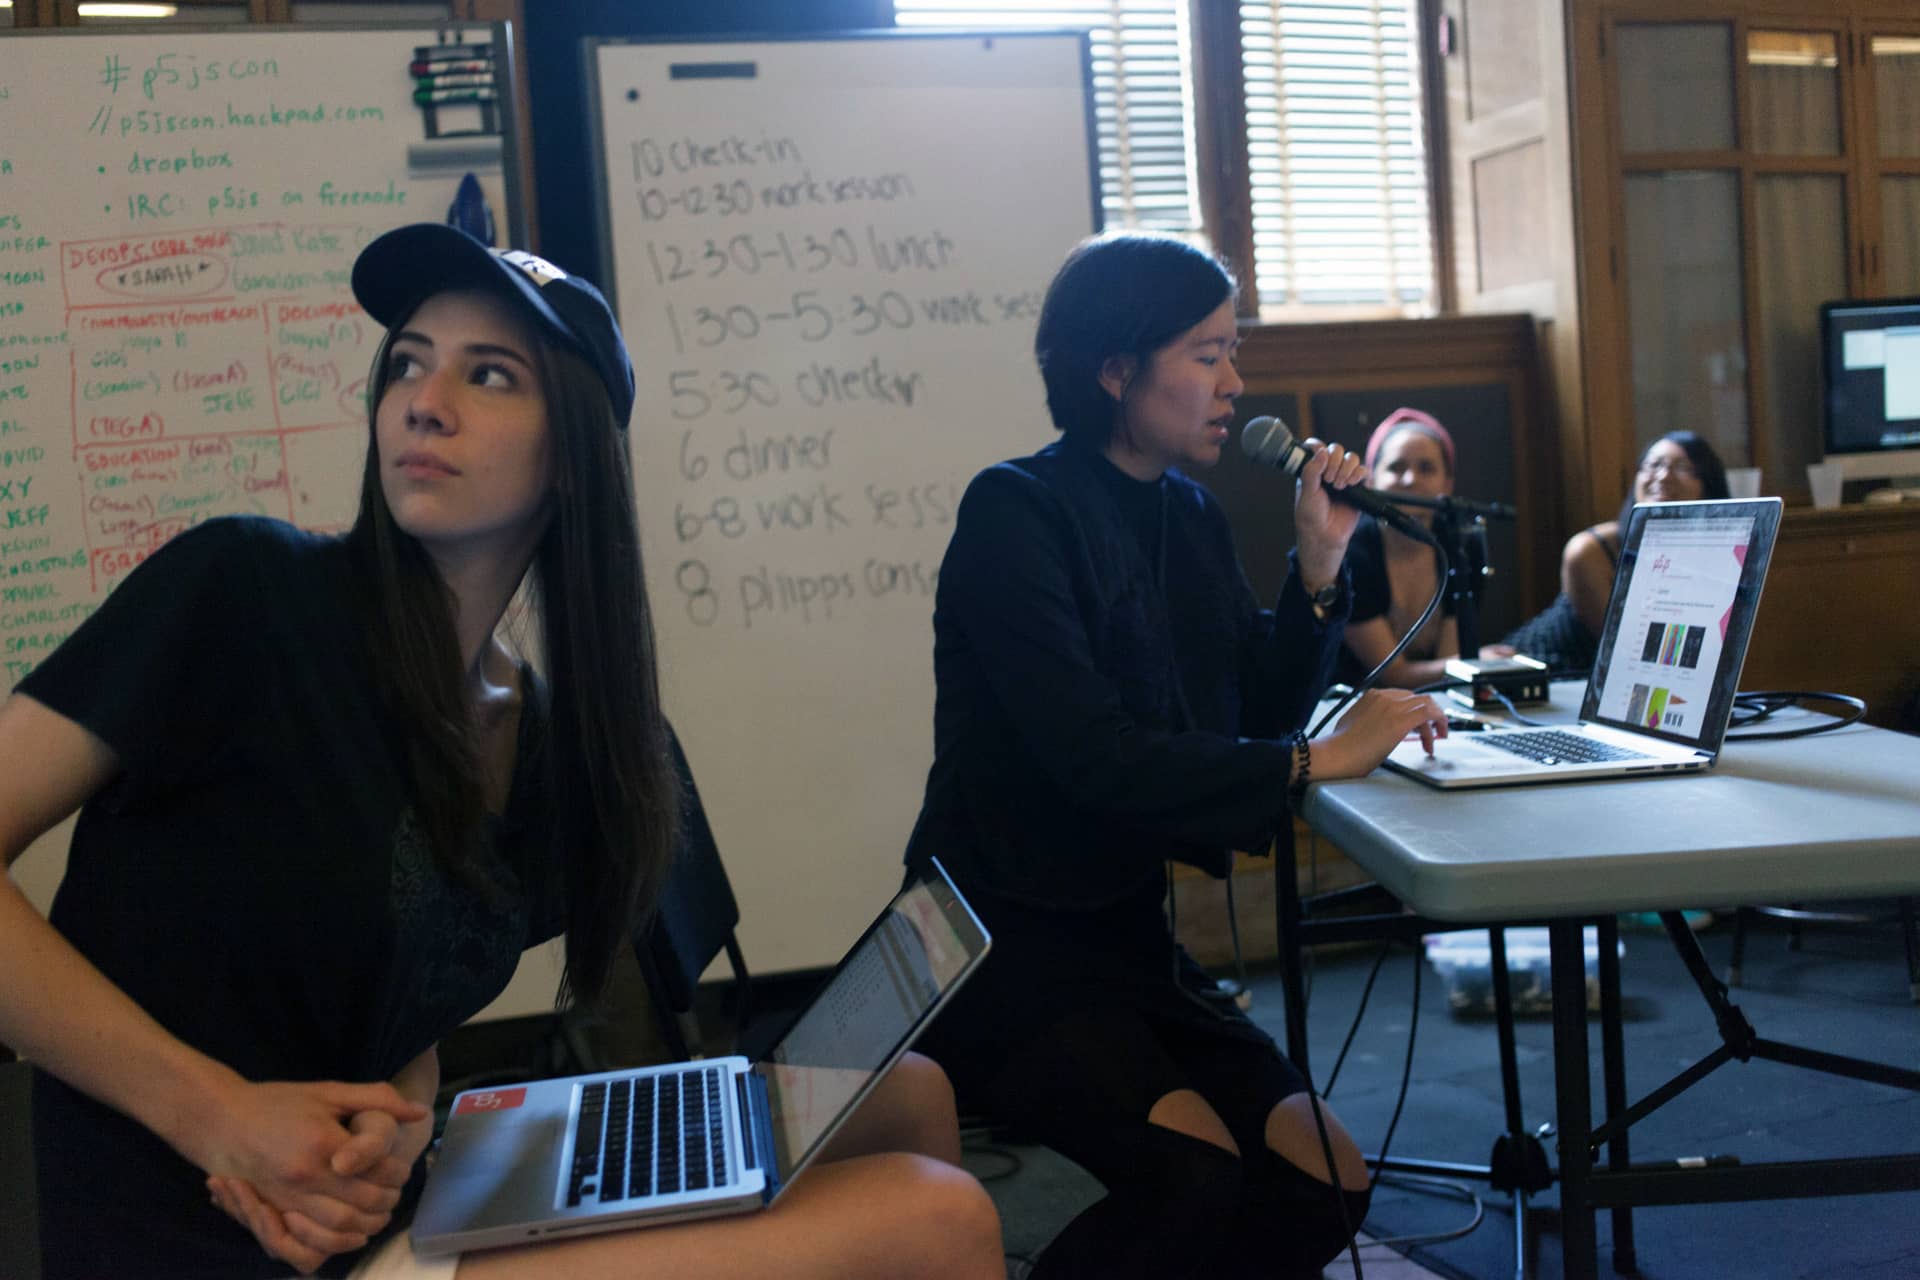 Woman reads about p5.js into a microphone to three female students"